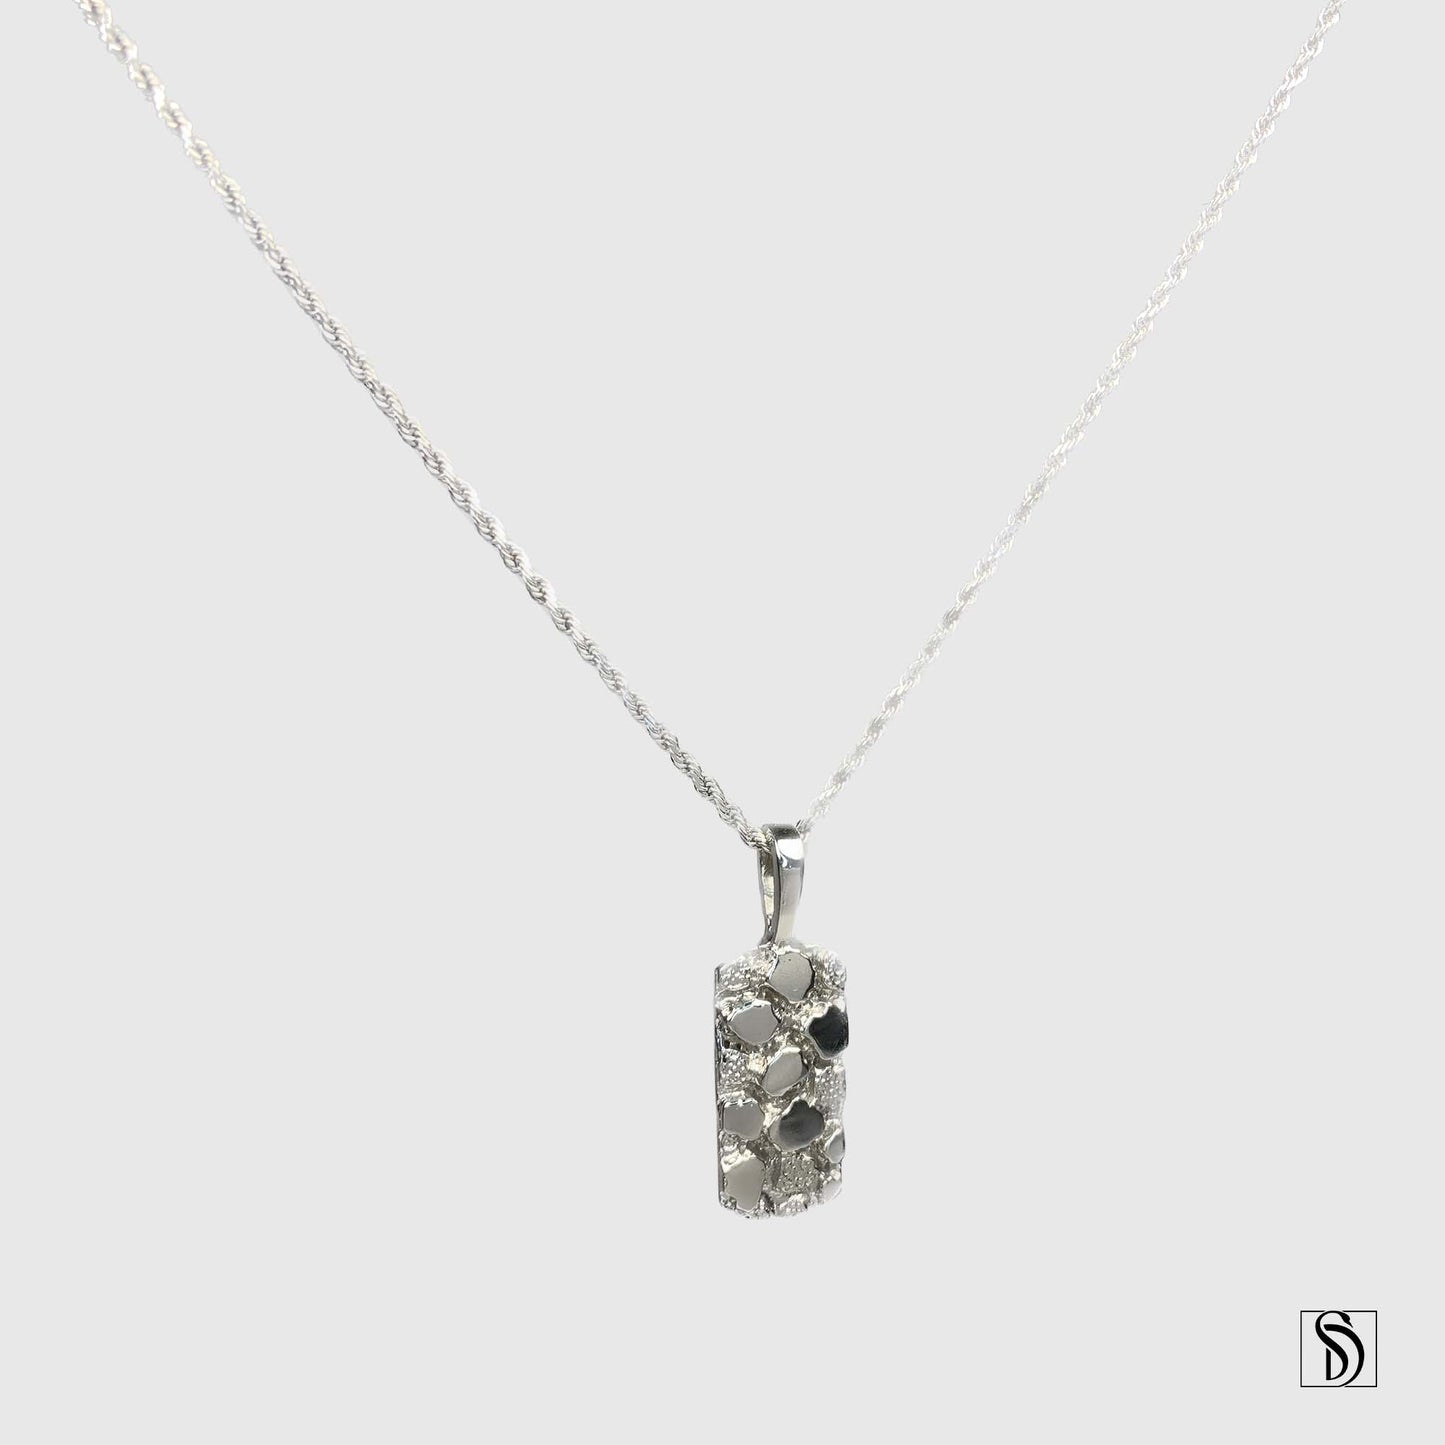 Solid 14K White Gold Nugget Pendant Necklace